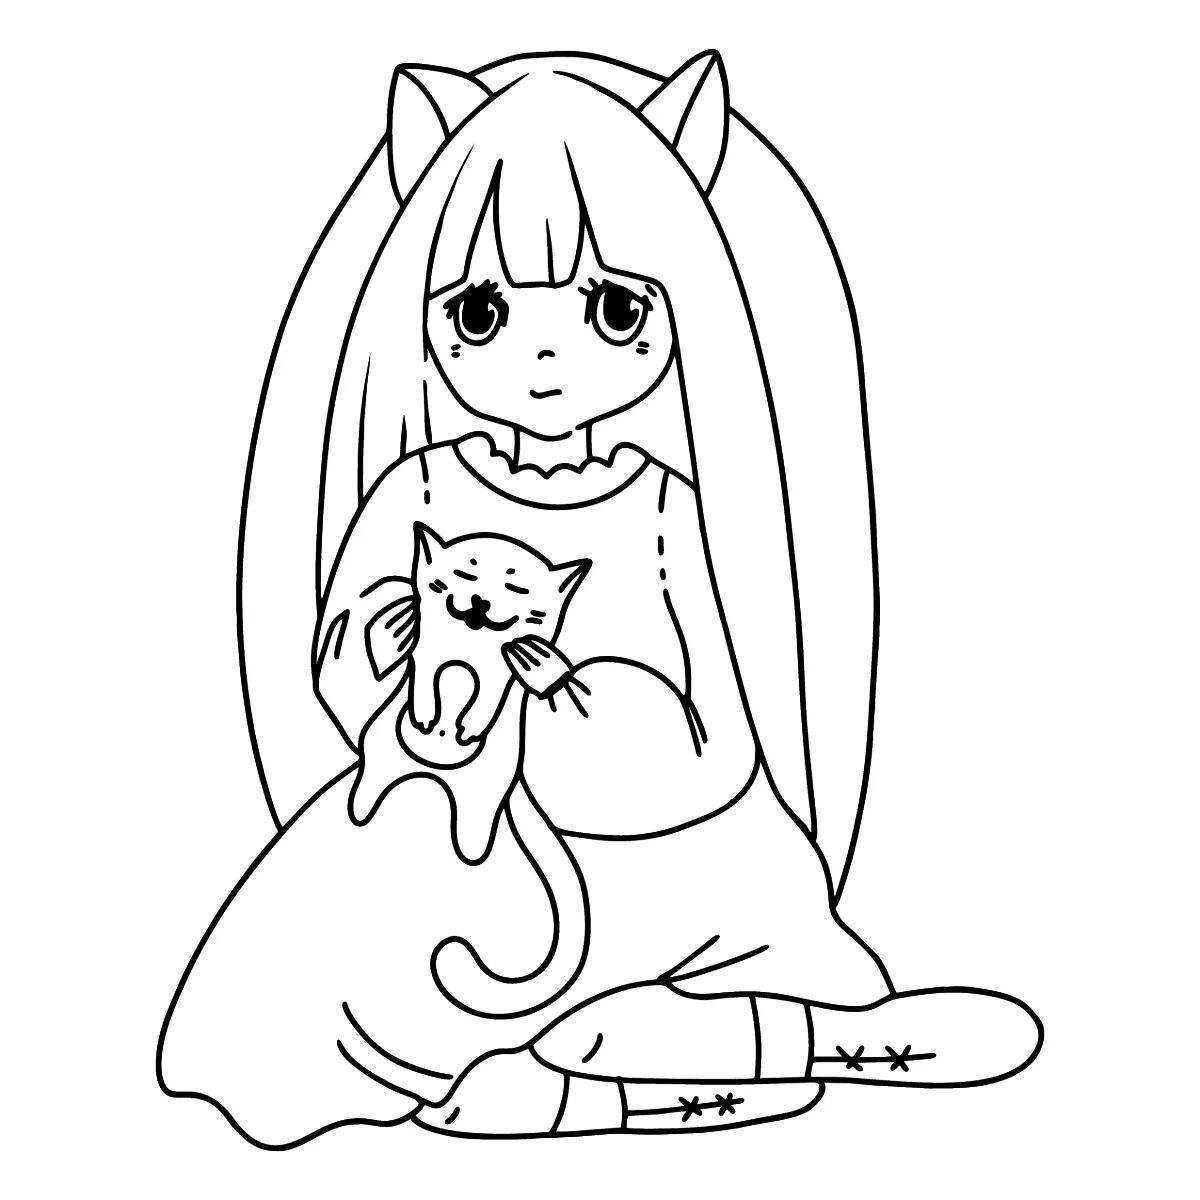 Caring anime kitty coloring book